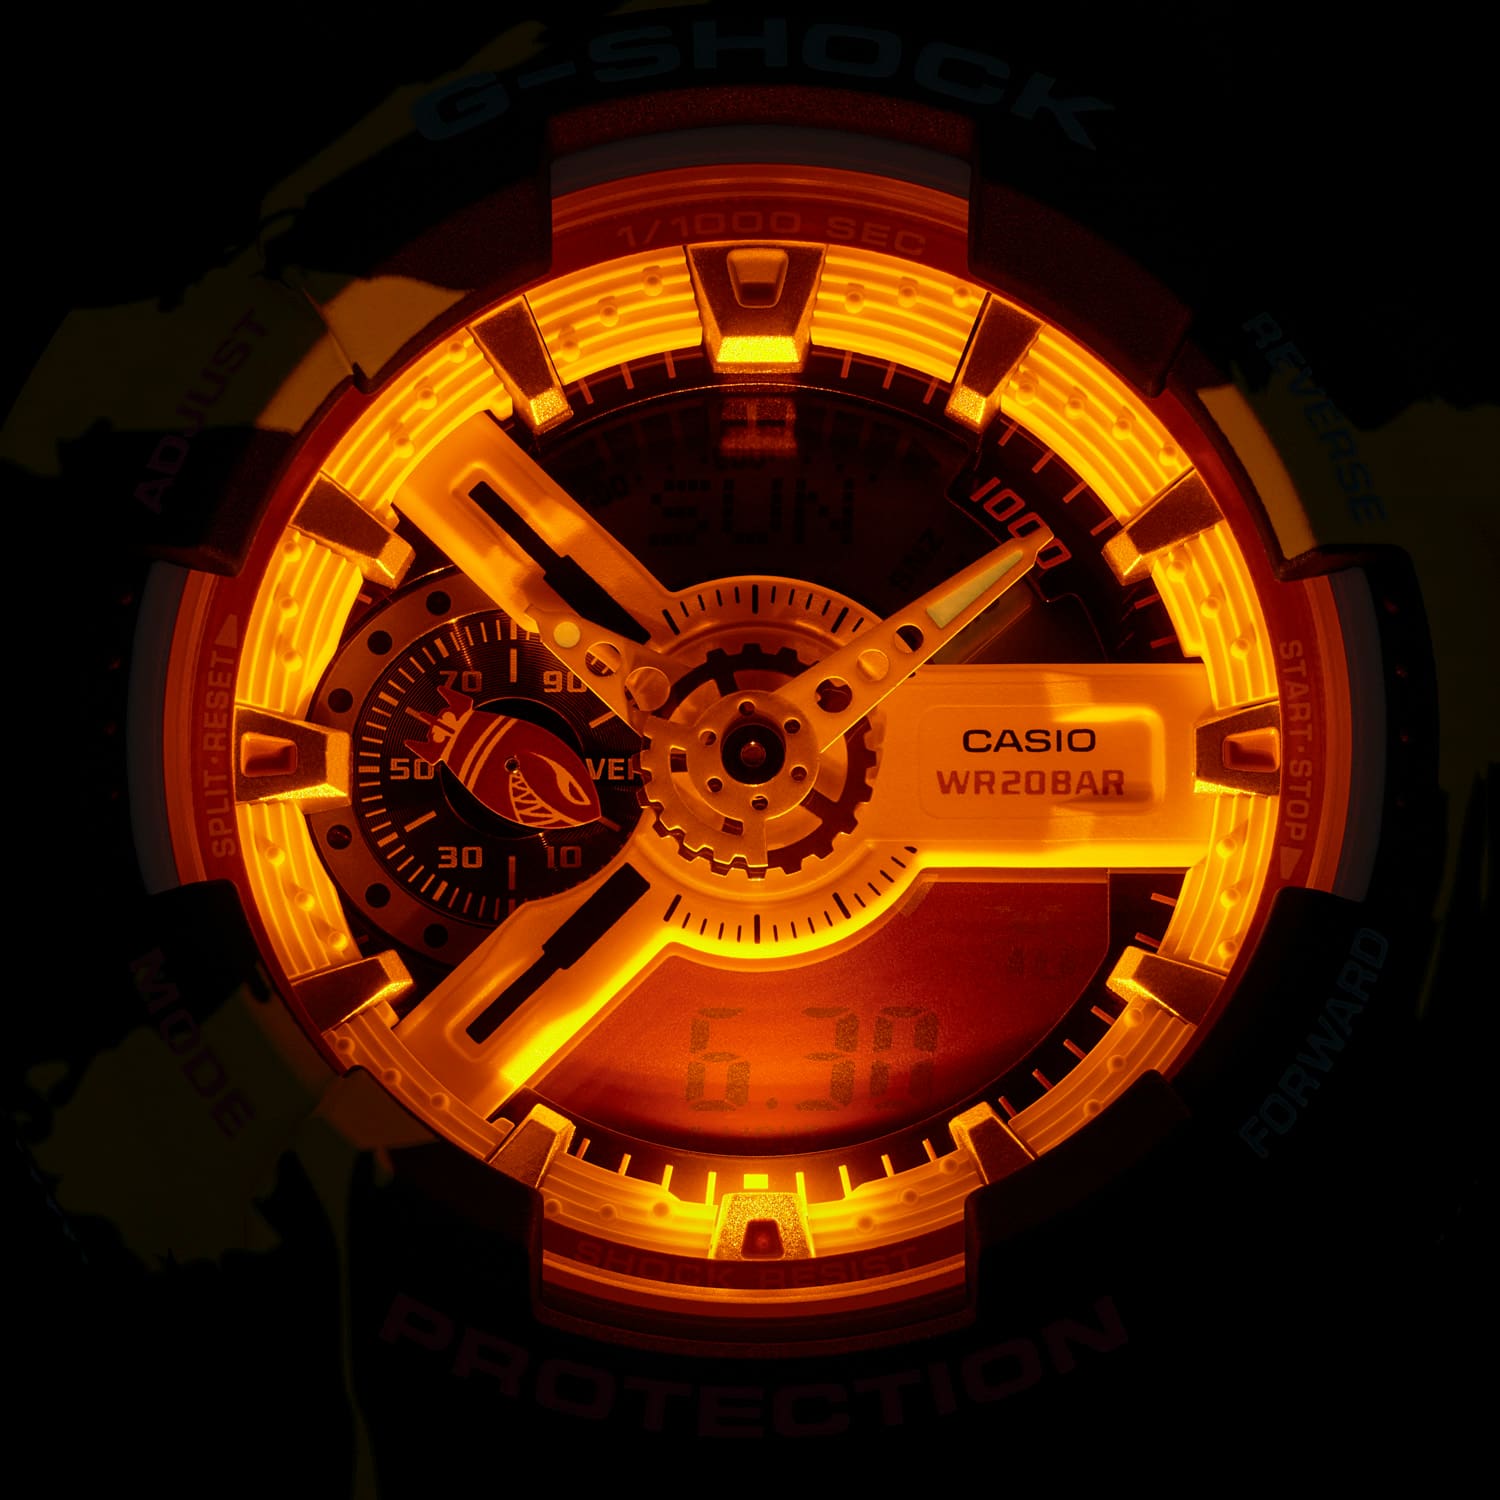 League of Legends GA-110LL Watch in the dark illuminated by LED